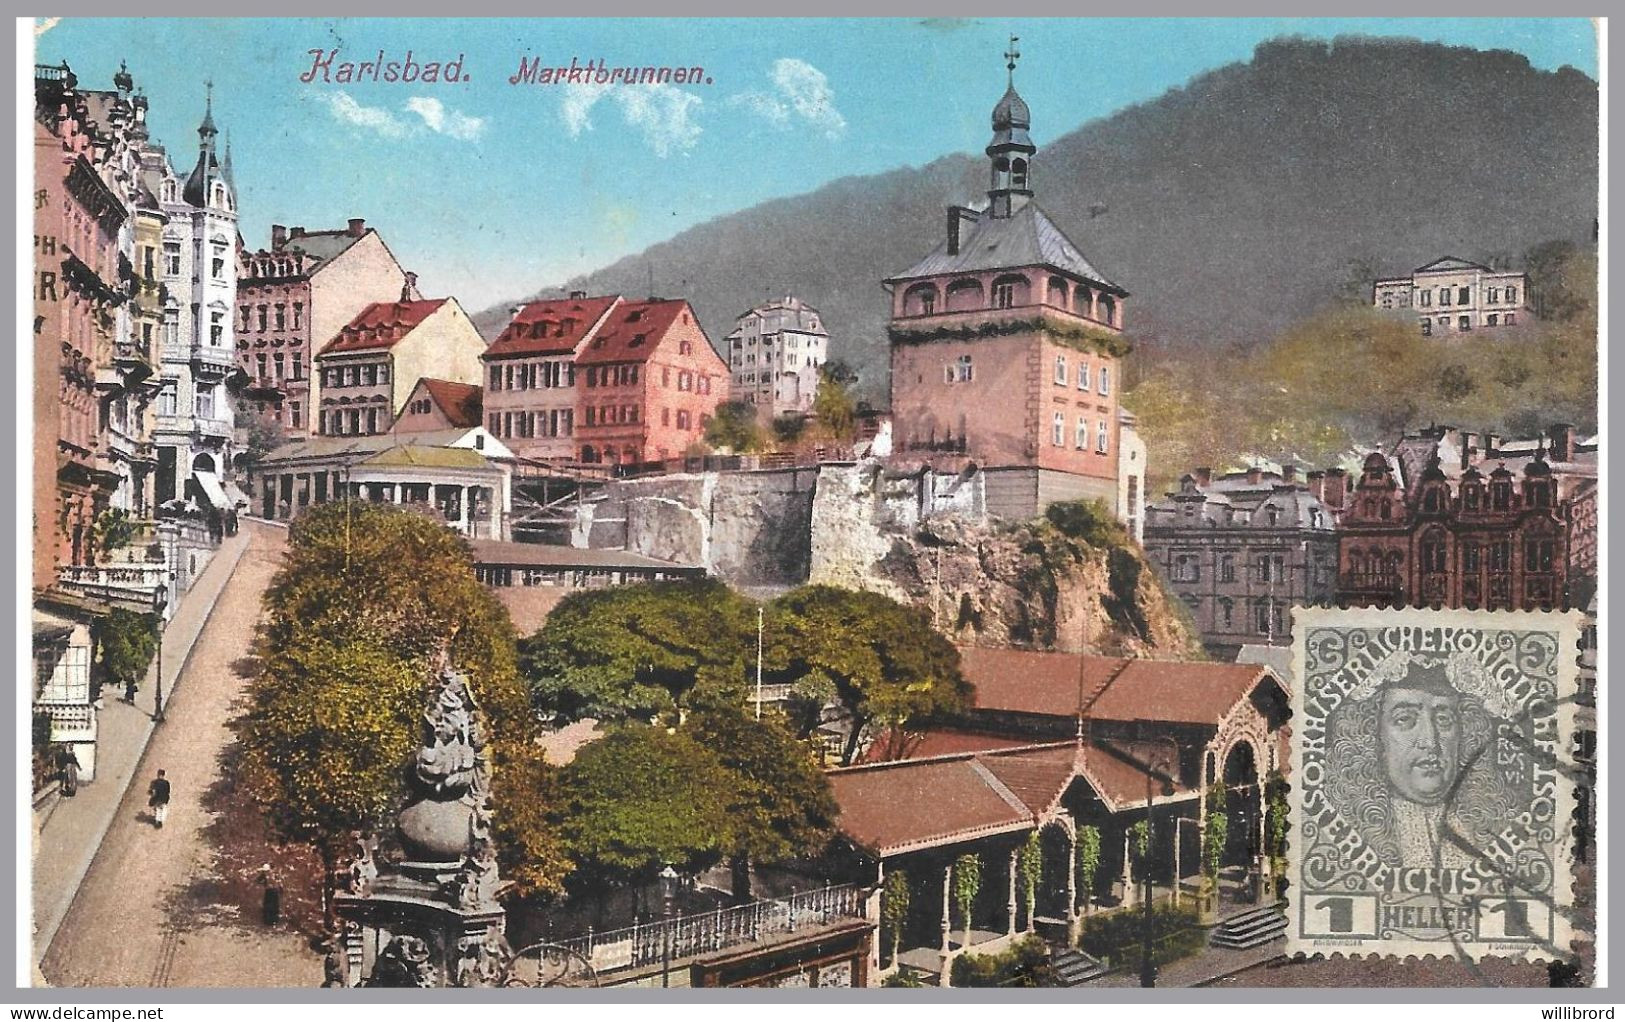 LUXEMBOURG - 1915 AUSTRIA Incoming Postcard - DOUBLE CENSORED  Karlsbad To Esch-sur-Alzette - Other & Unclassified